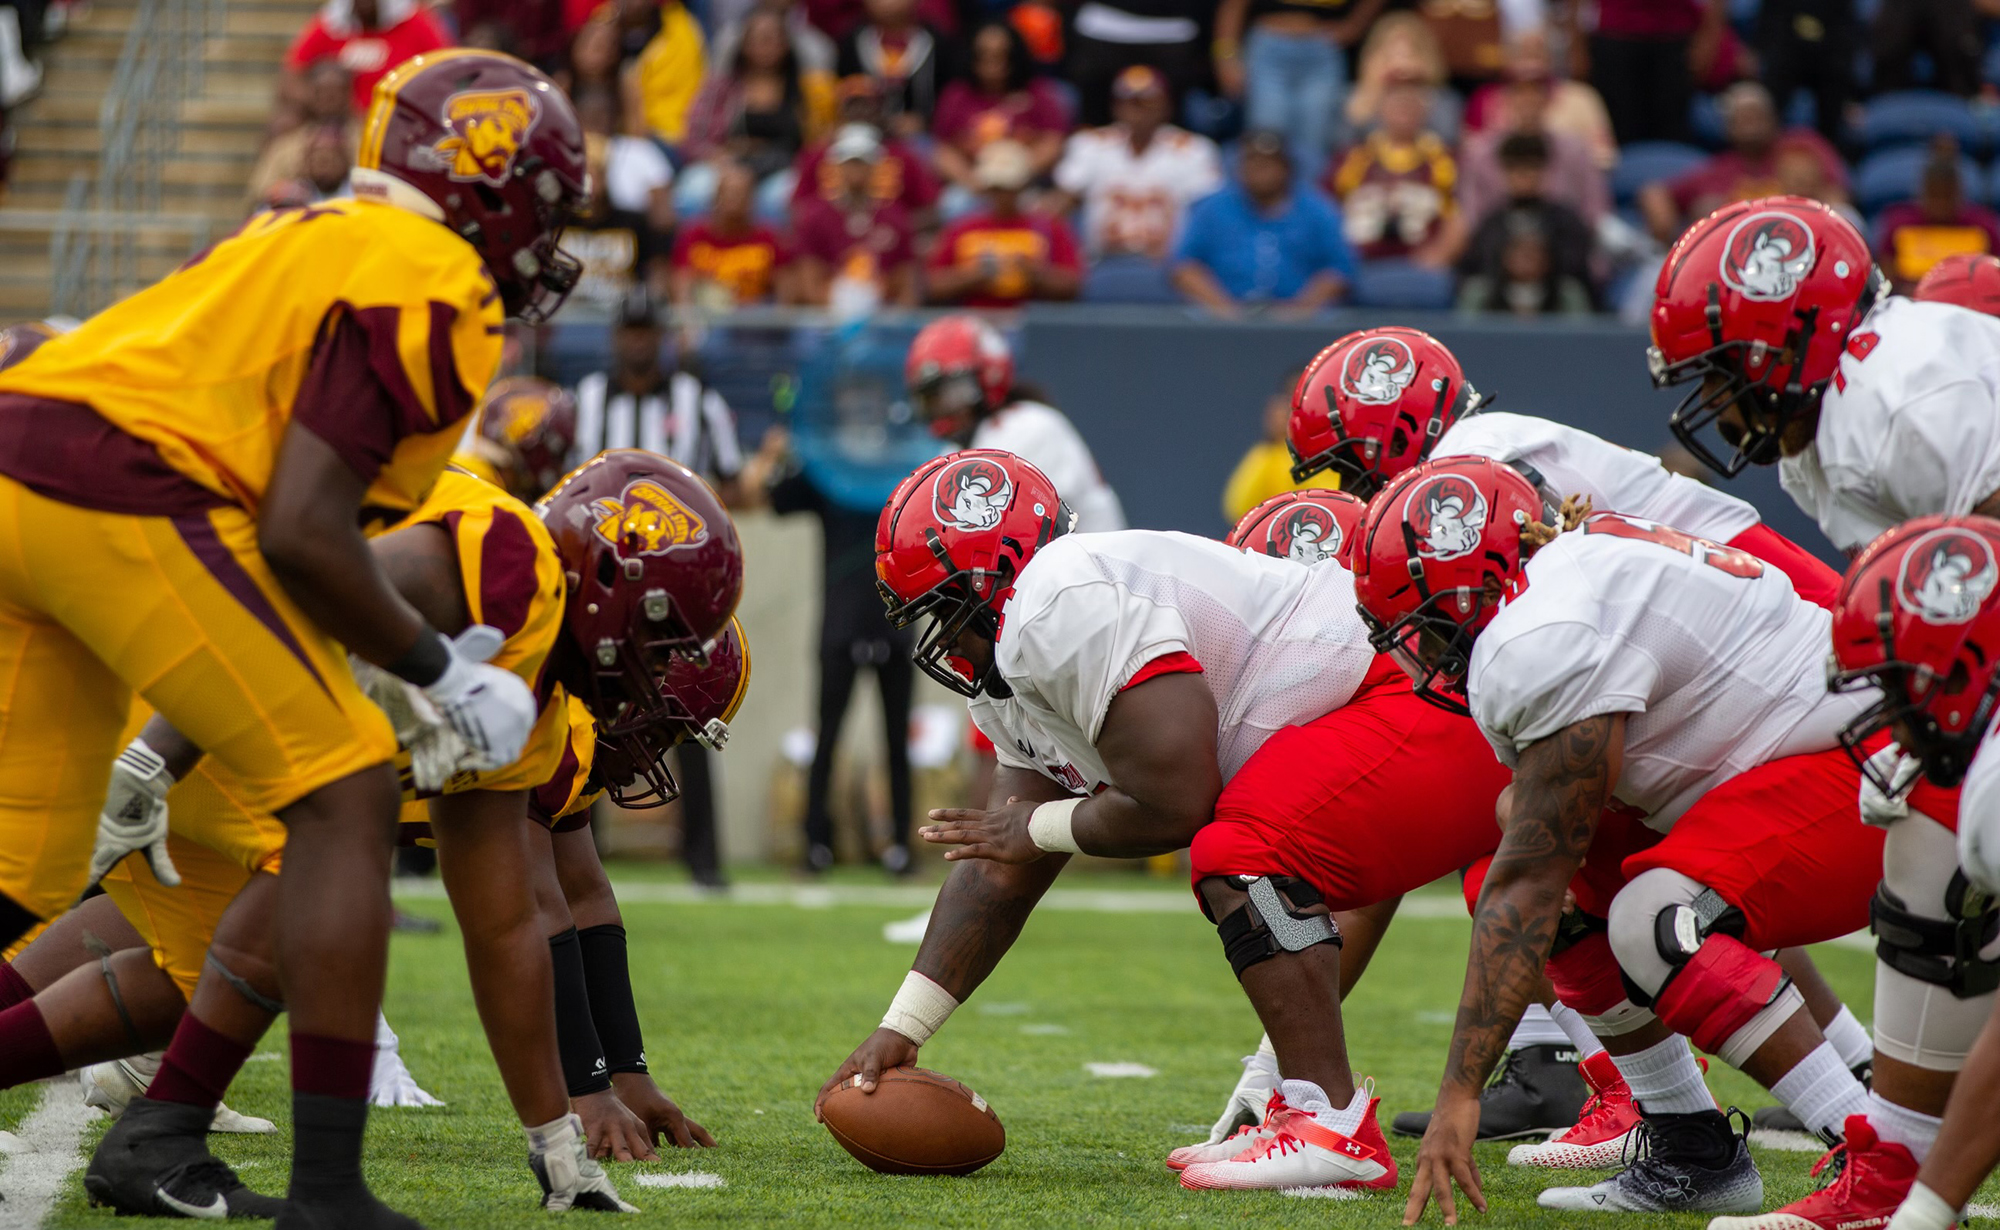 Central State University opened the season with a 41-21 victory Sunday over Winston-Salem State University in the Black College Hall of Fame Classic at Tom Benson Hall of Fame Stadium in Canton, Ohio.